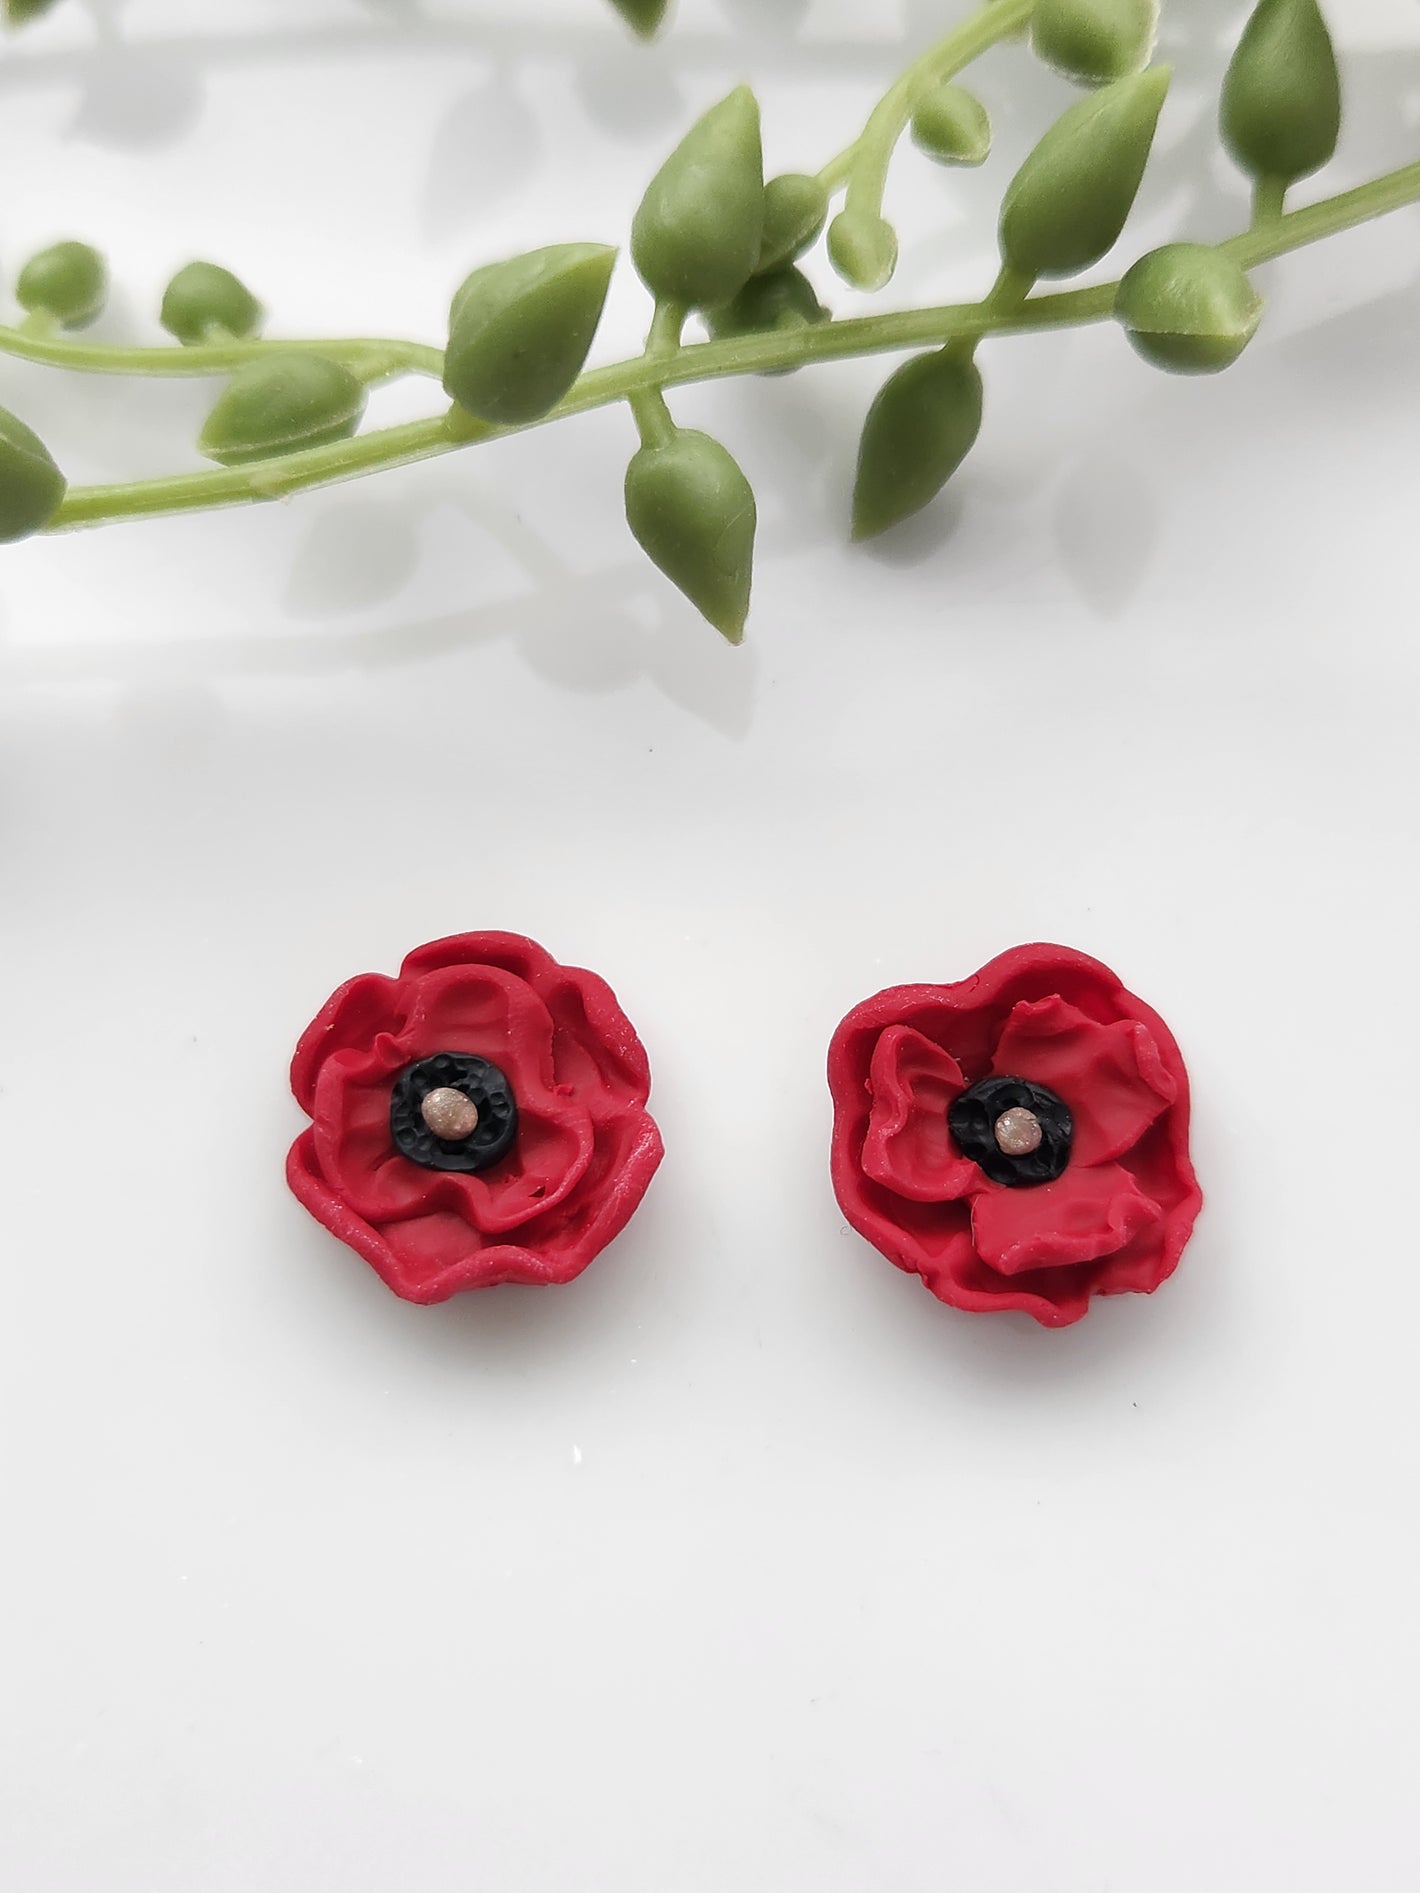 Handmade polymer clay earrings! These beautiful studs are made from red clay in a poppy flower design. They are a unique and perfect touch to any outfit. Lightweight, matte, and approximately .5" long.